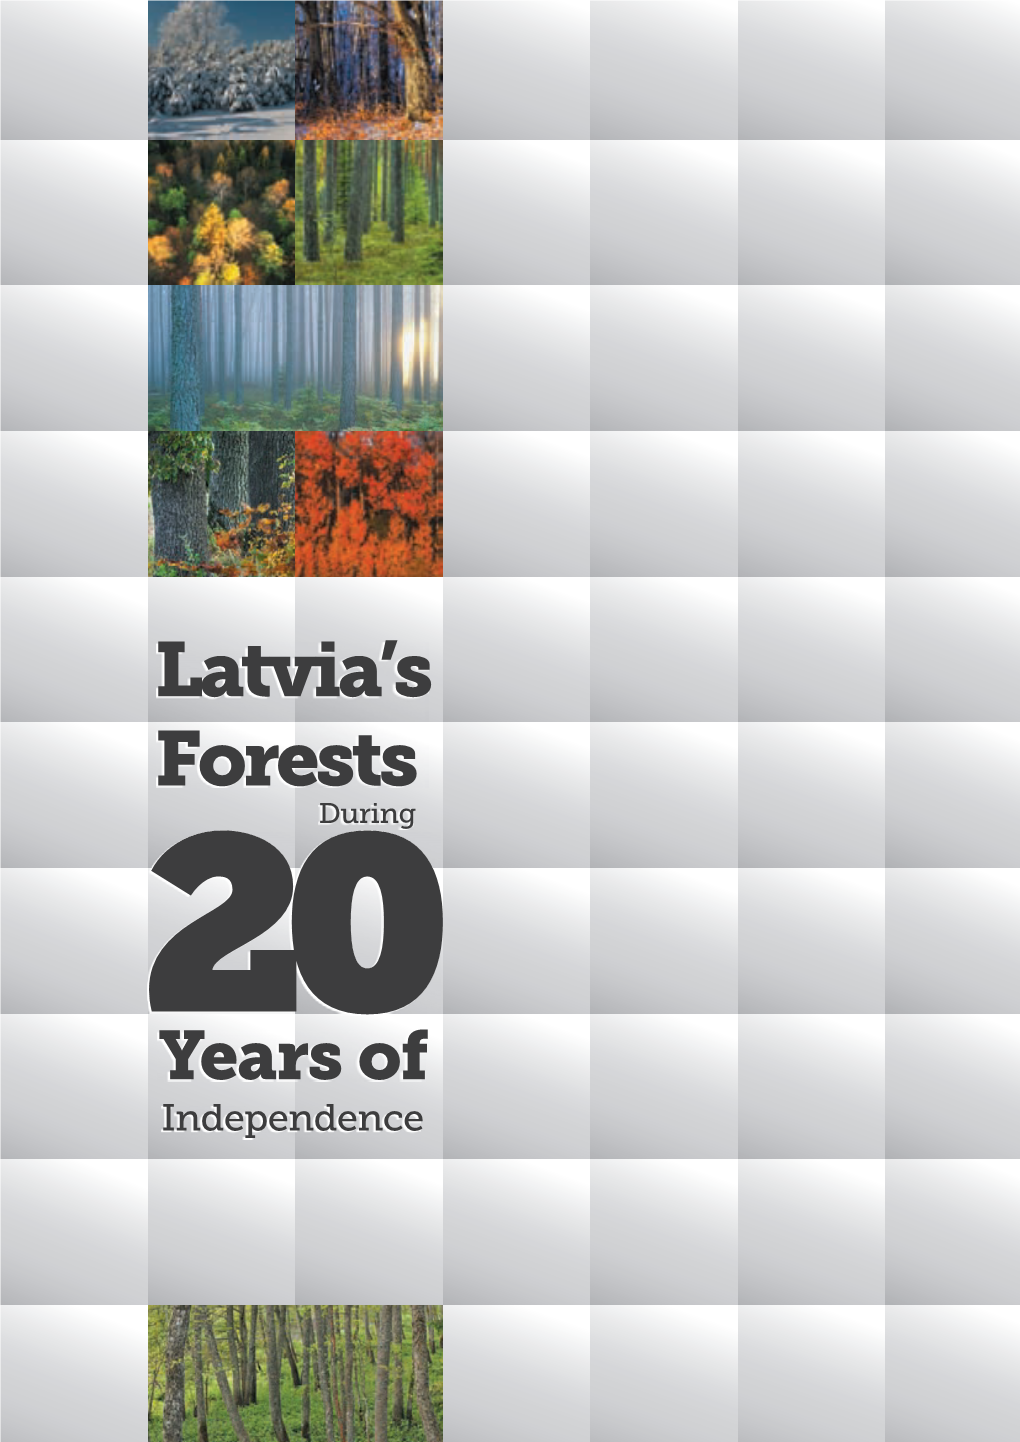 Latvia's Forests